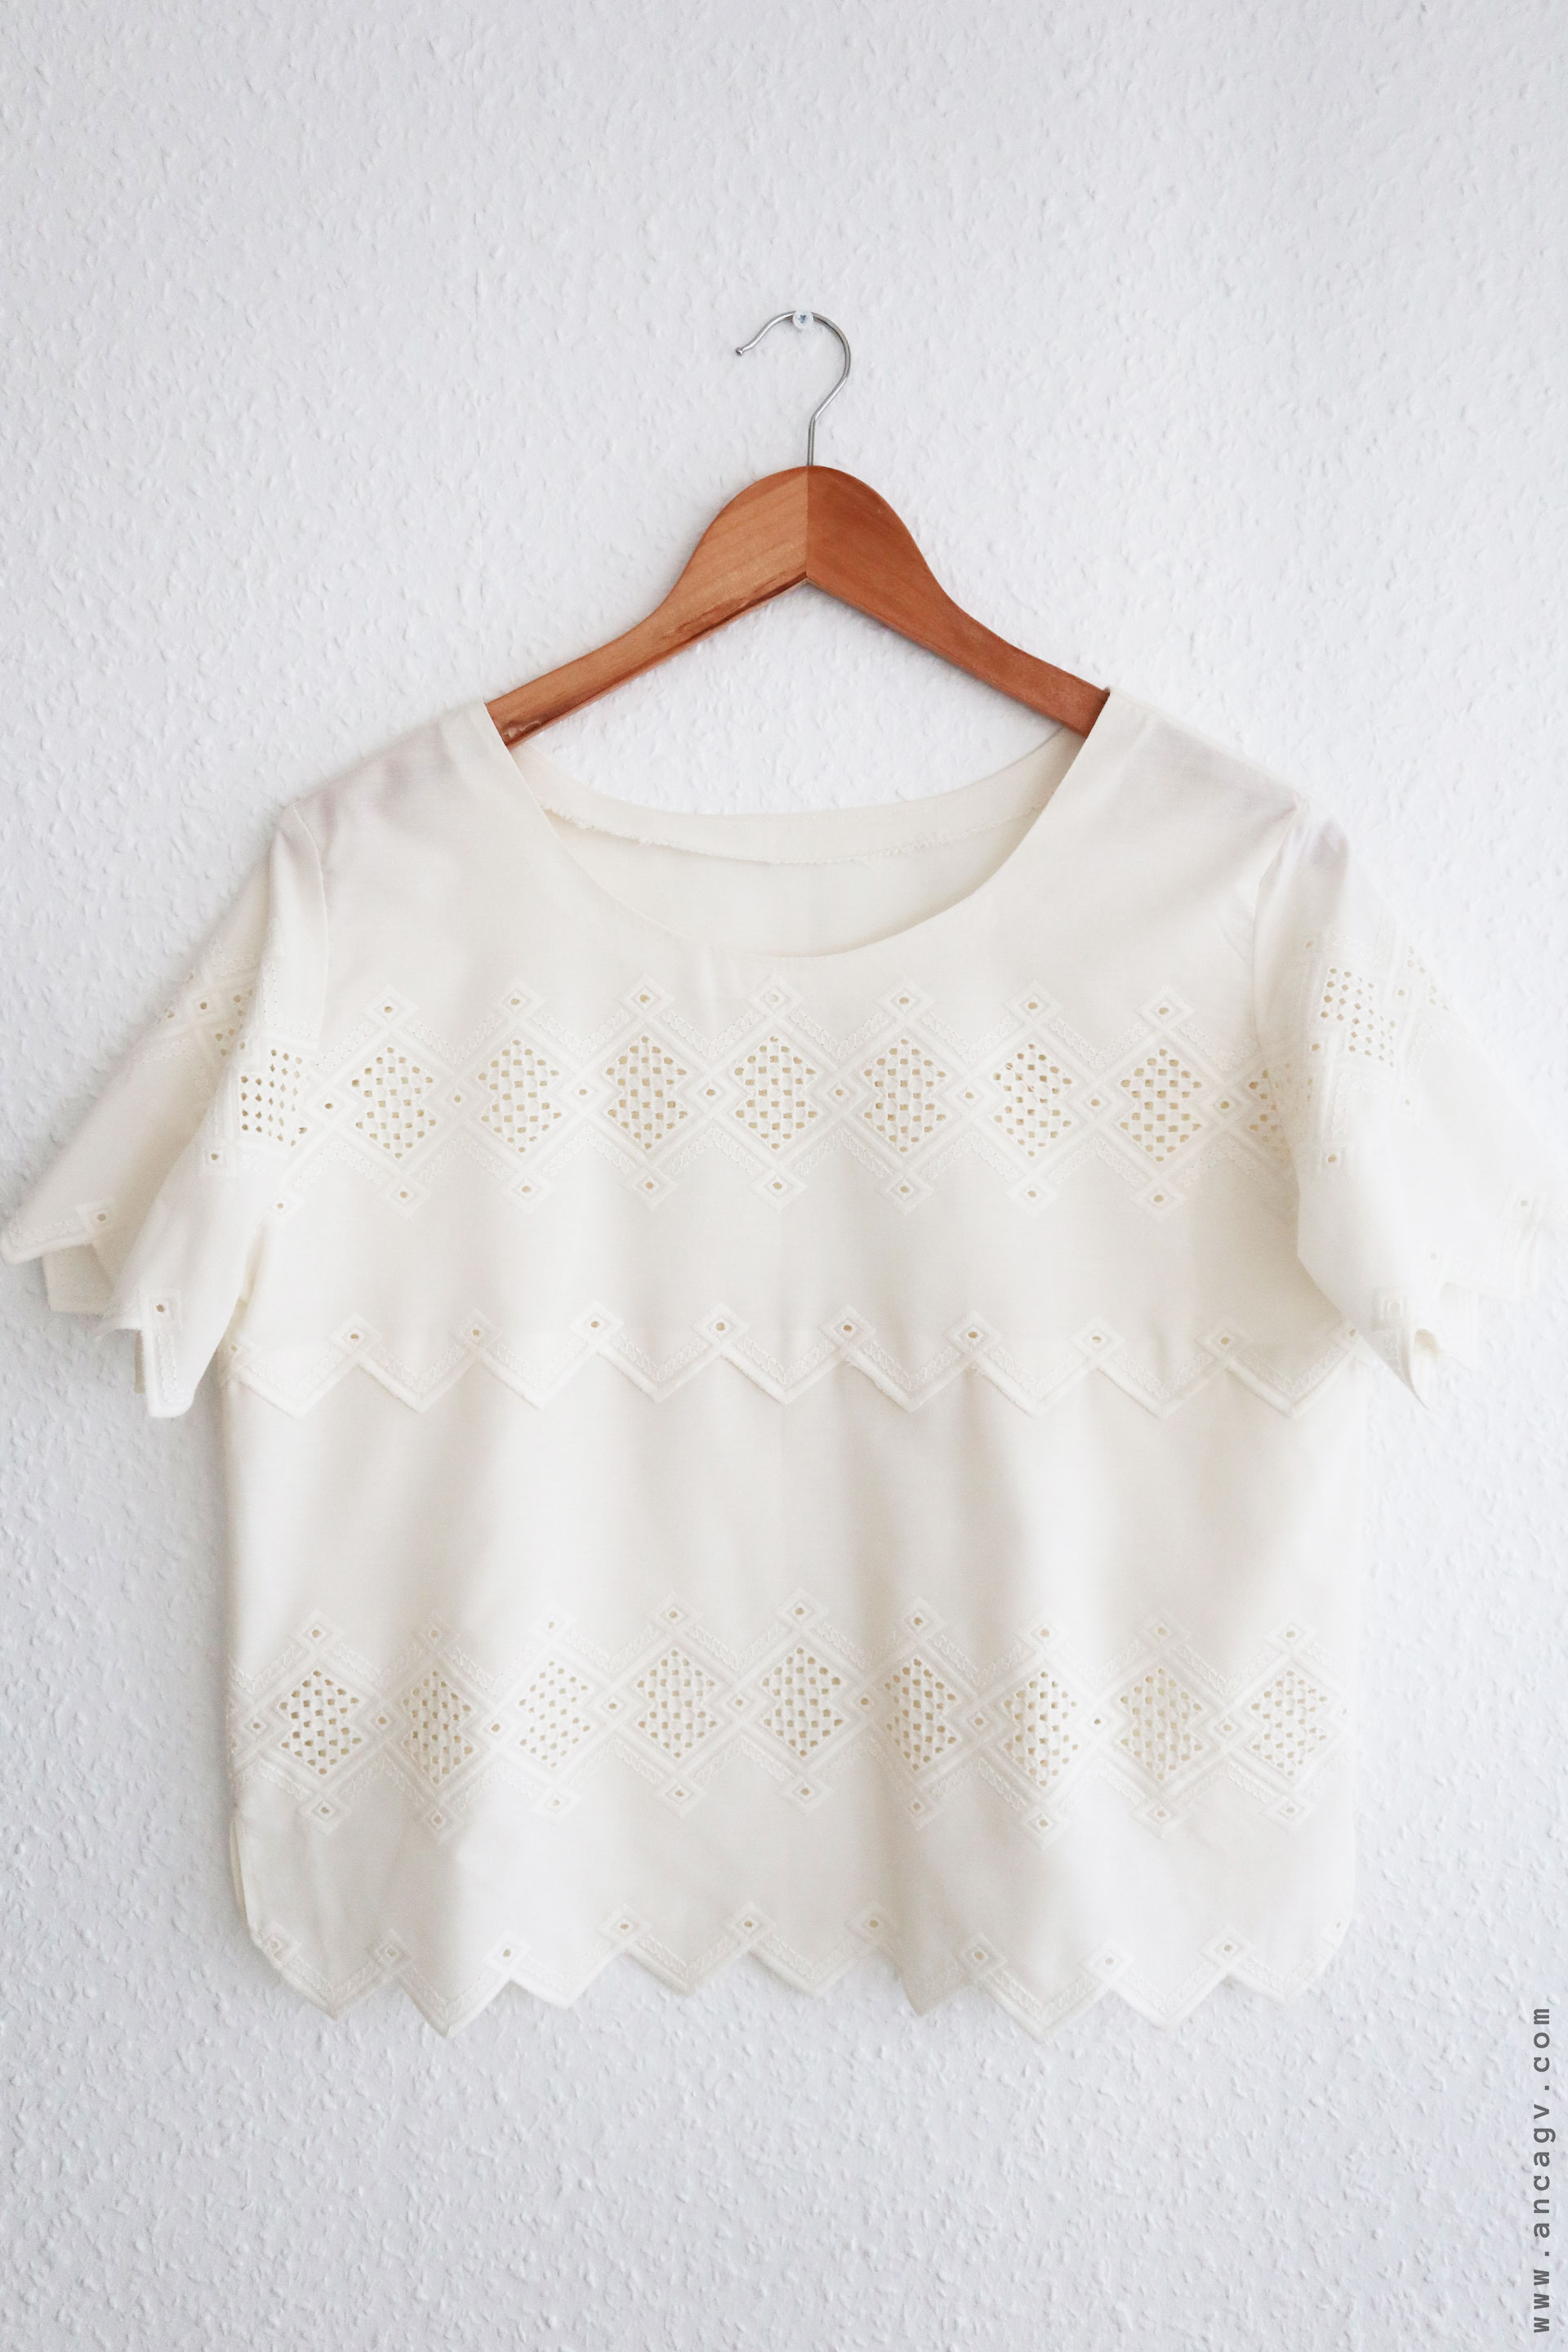 diy-embroidery-blouse8